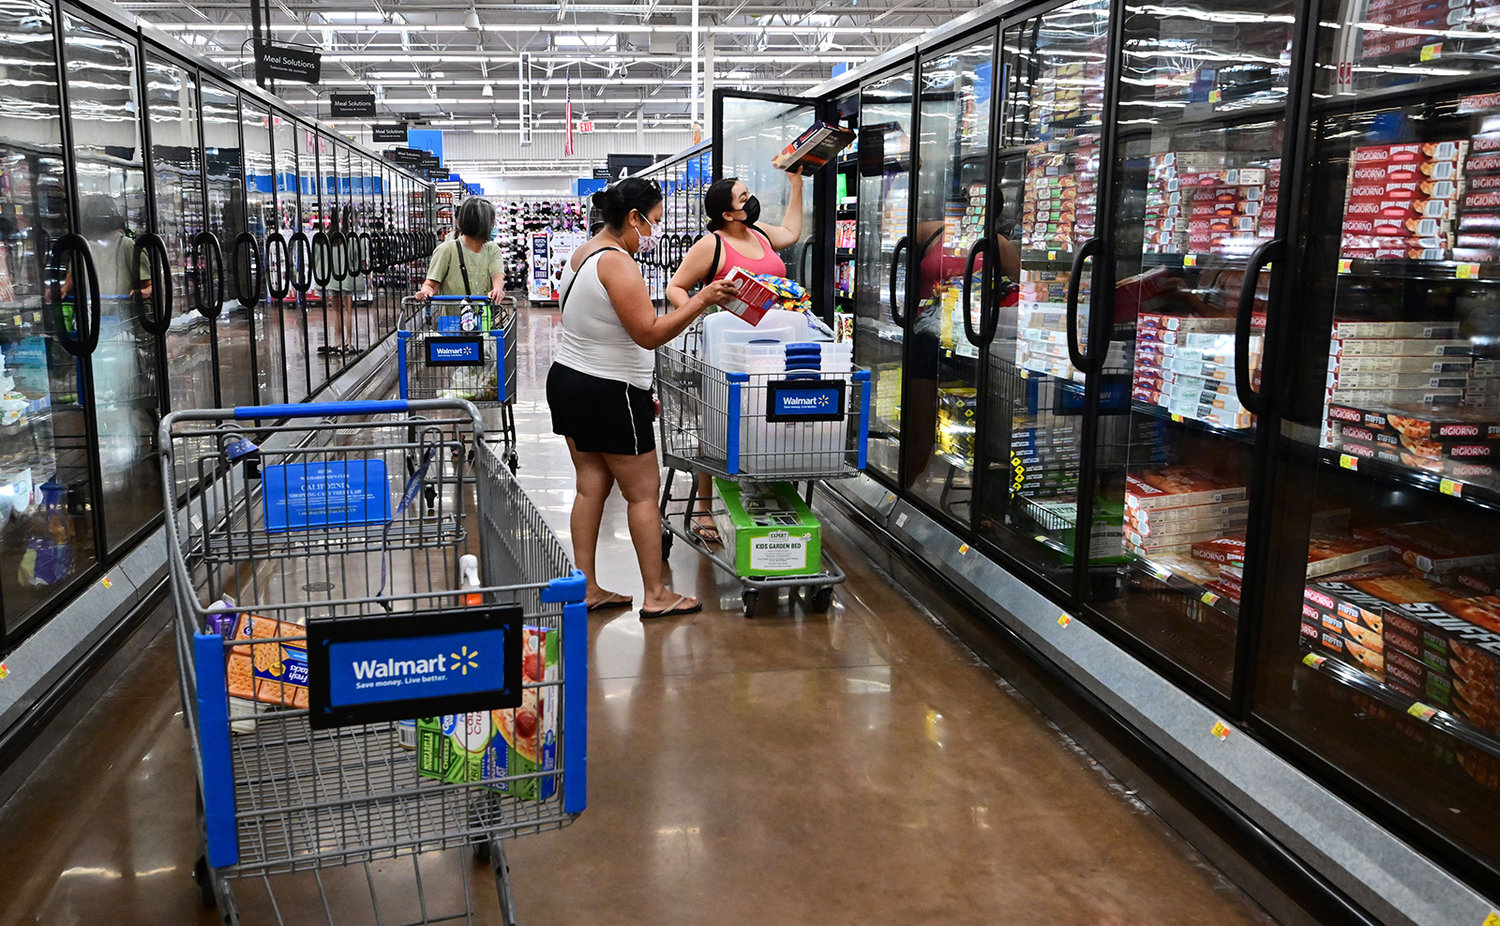 People shop for frozen food at a store in Rosemead, California, on June 28, 2022. (Frederic J. Brown/AFP via Getty Images/TNS)